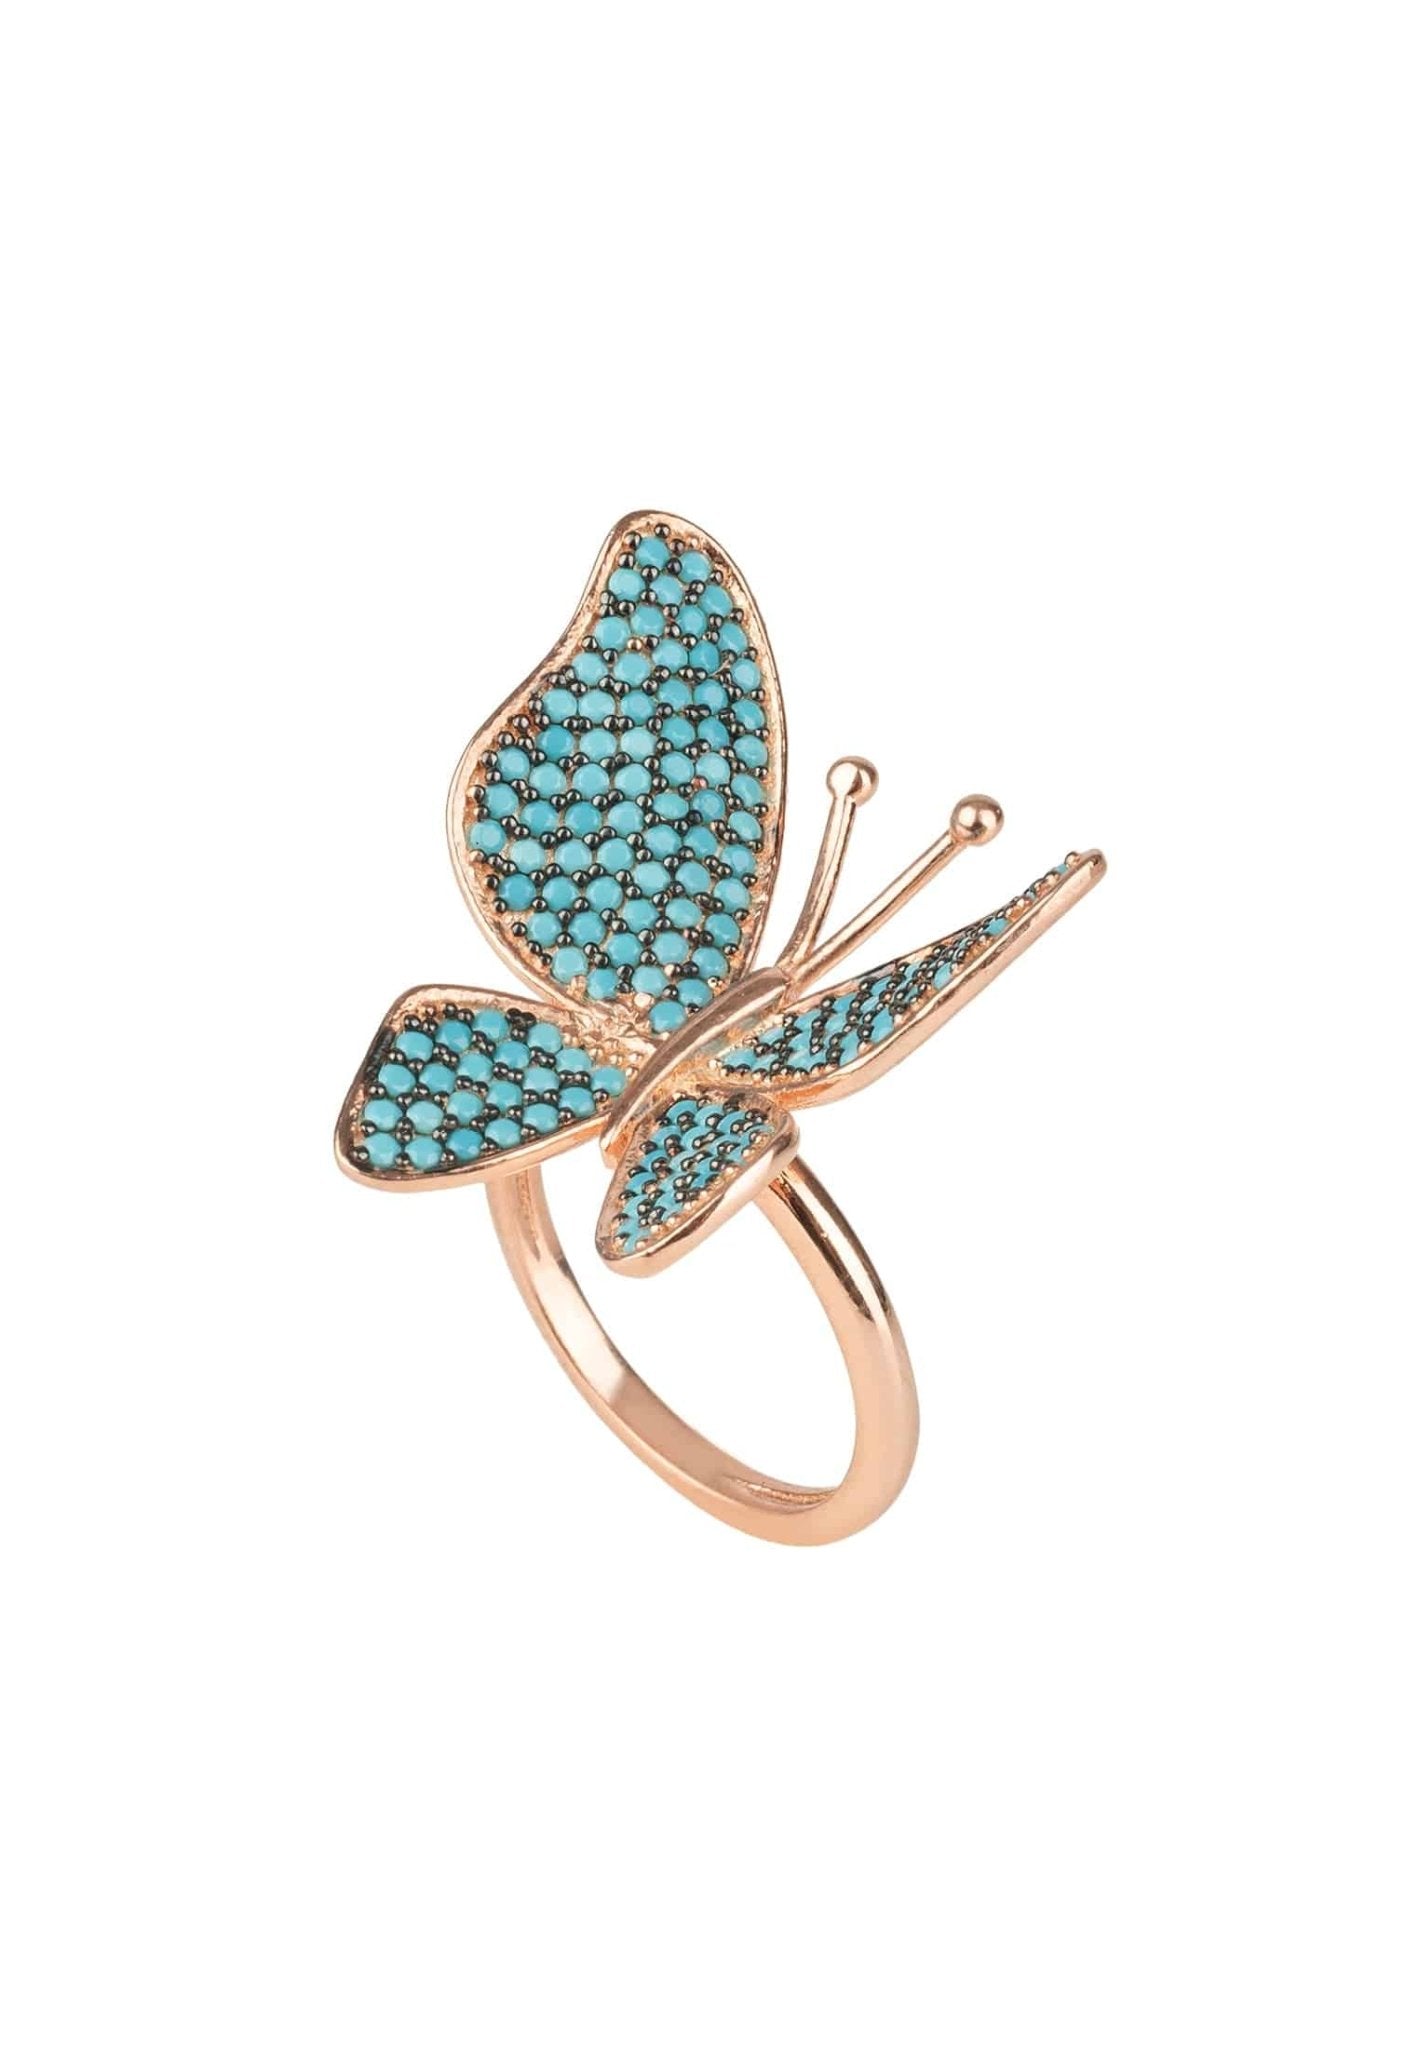 Butterfly Cocktail Ring Blue Turquoise Rosegold - LATELITA Rings